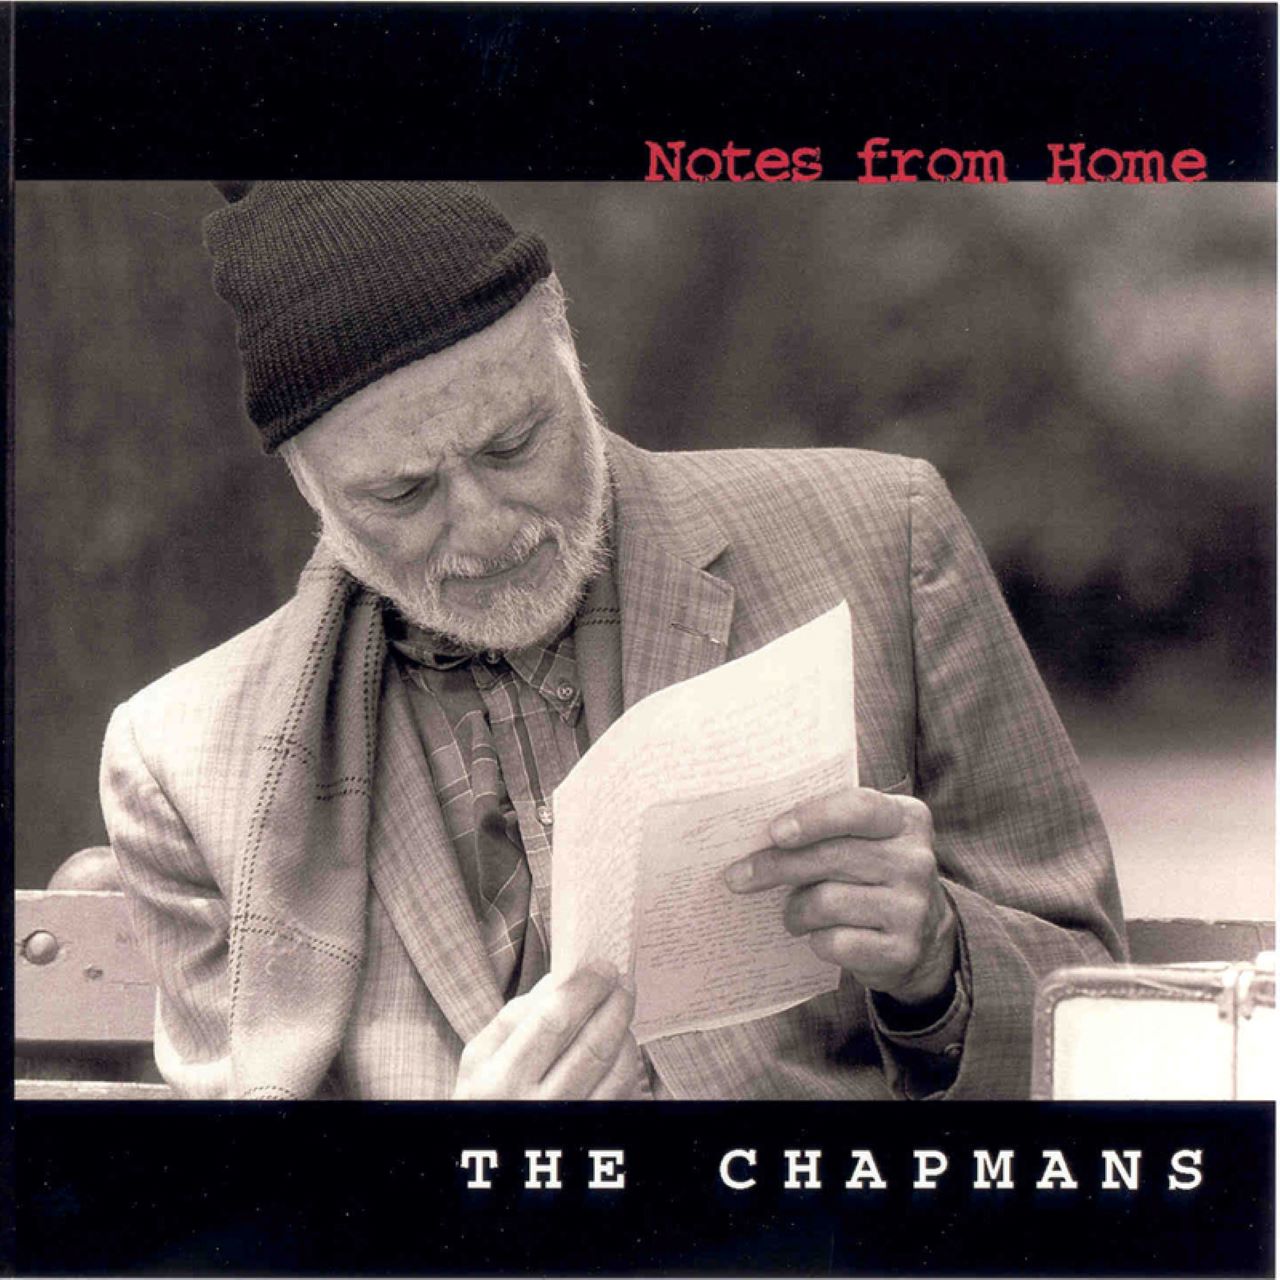 Chapmans - Notes From Home cover album